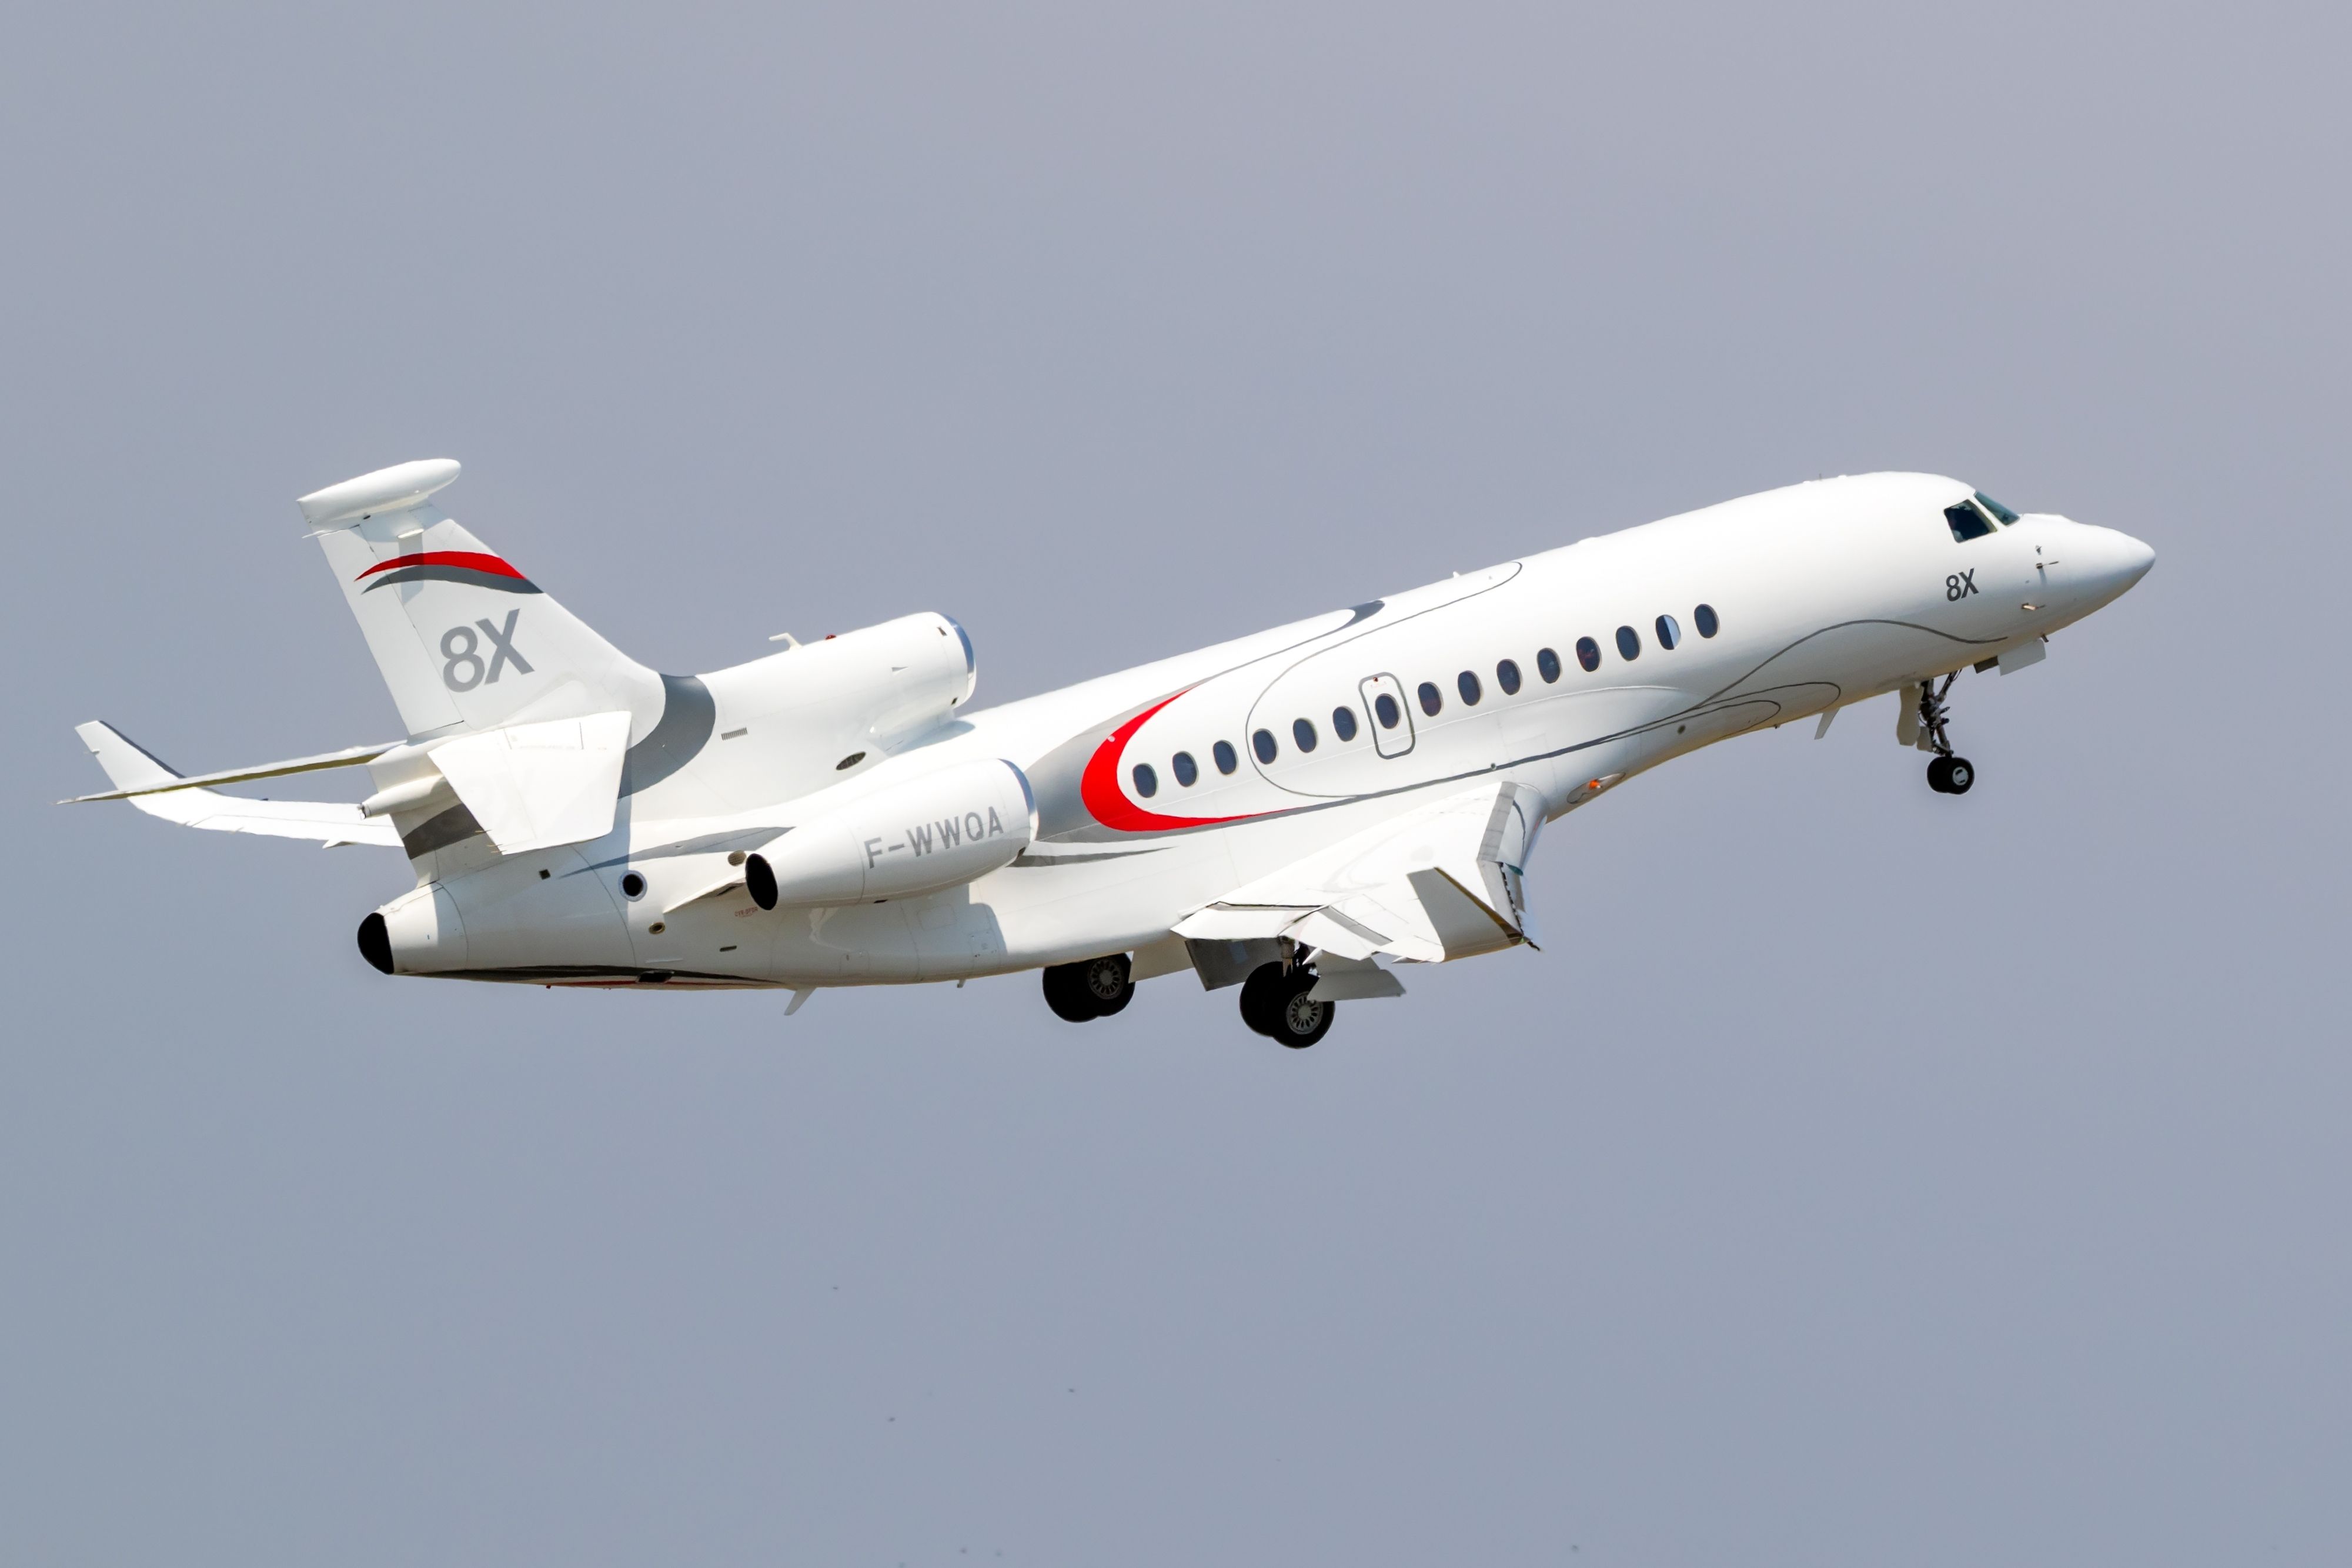 A Dassault Falcon 8X Flying in the sky.